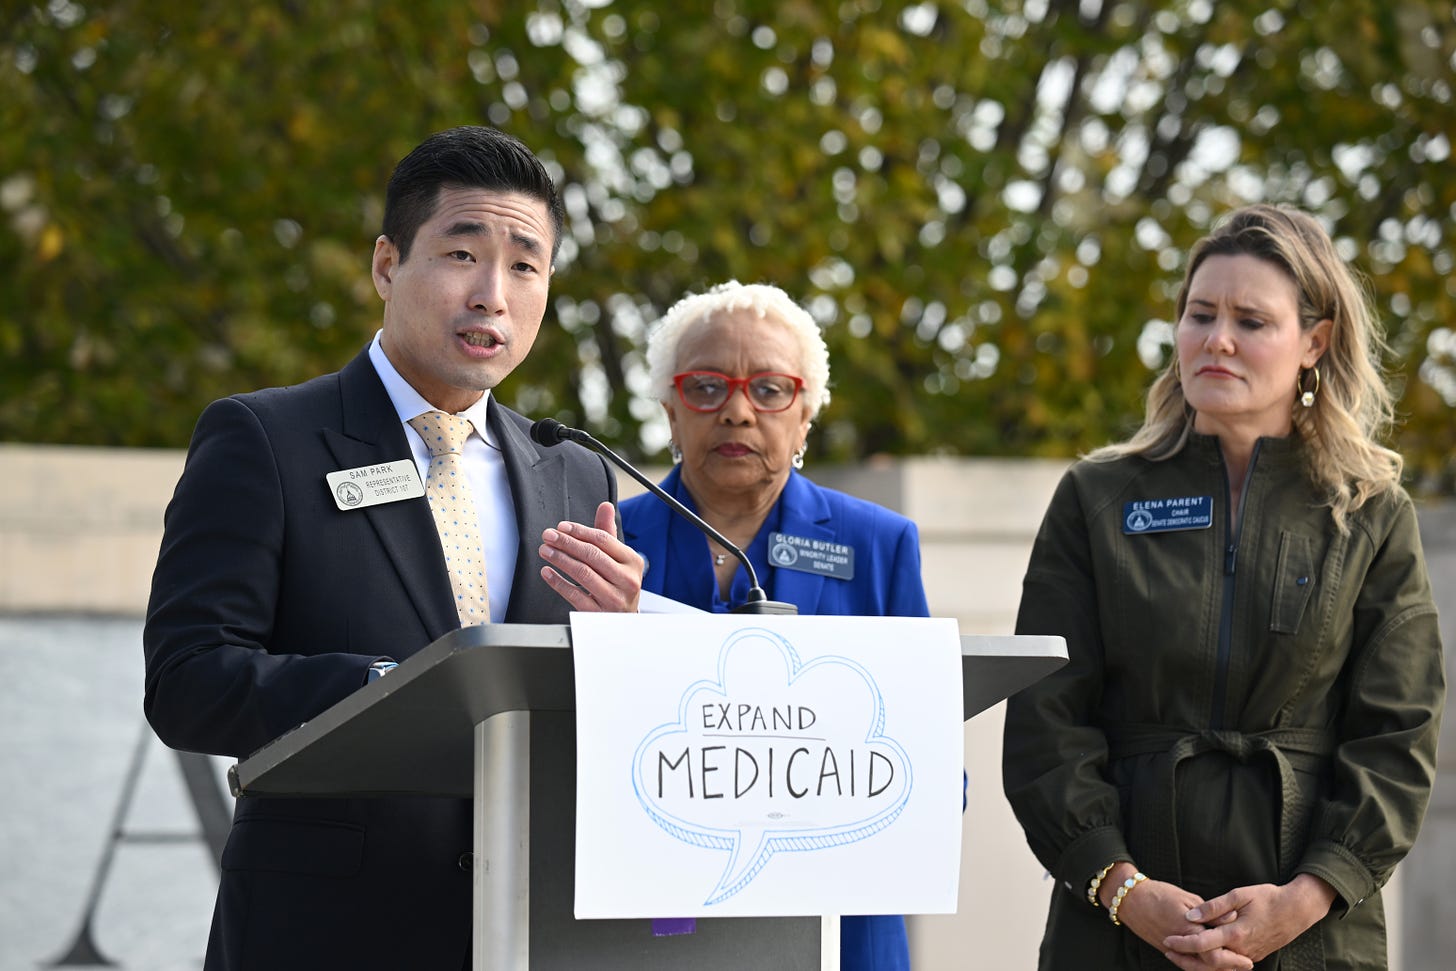 Georgia GOP leaders still oppose full Medicaid expansion, for now